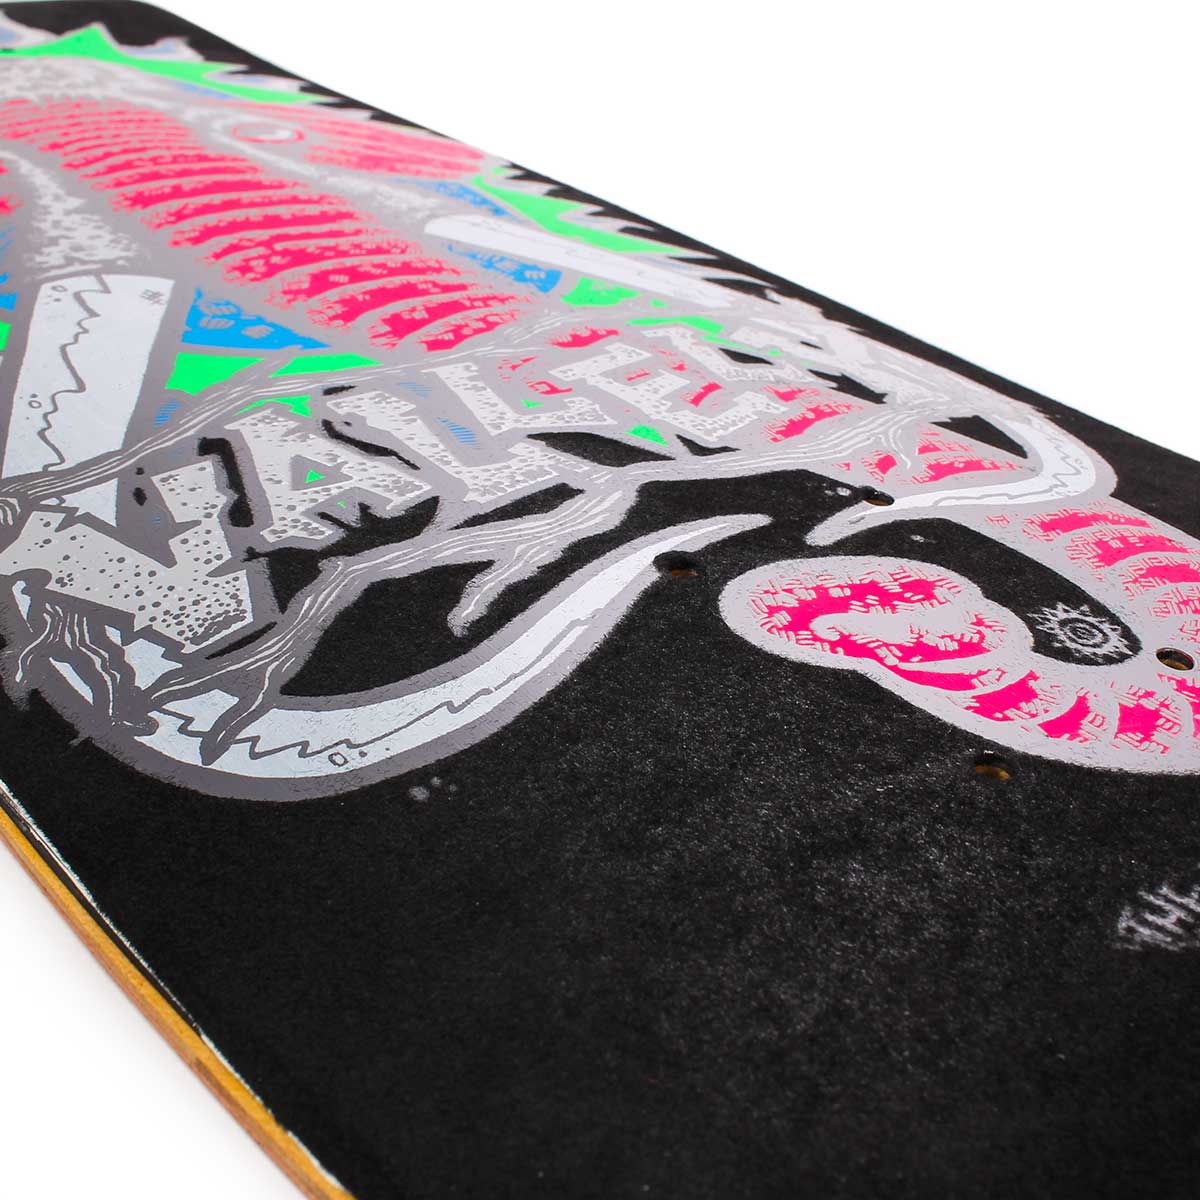 Details about   New Deal Mike Vallely Mammoth Skateboard Deck 